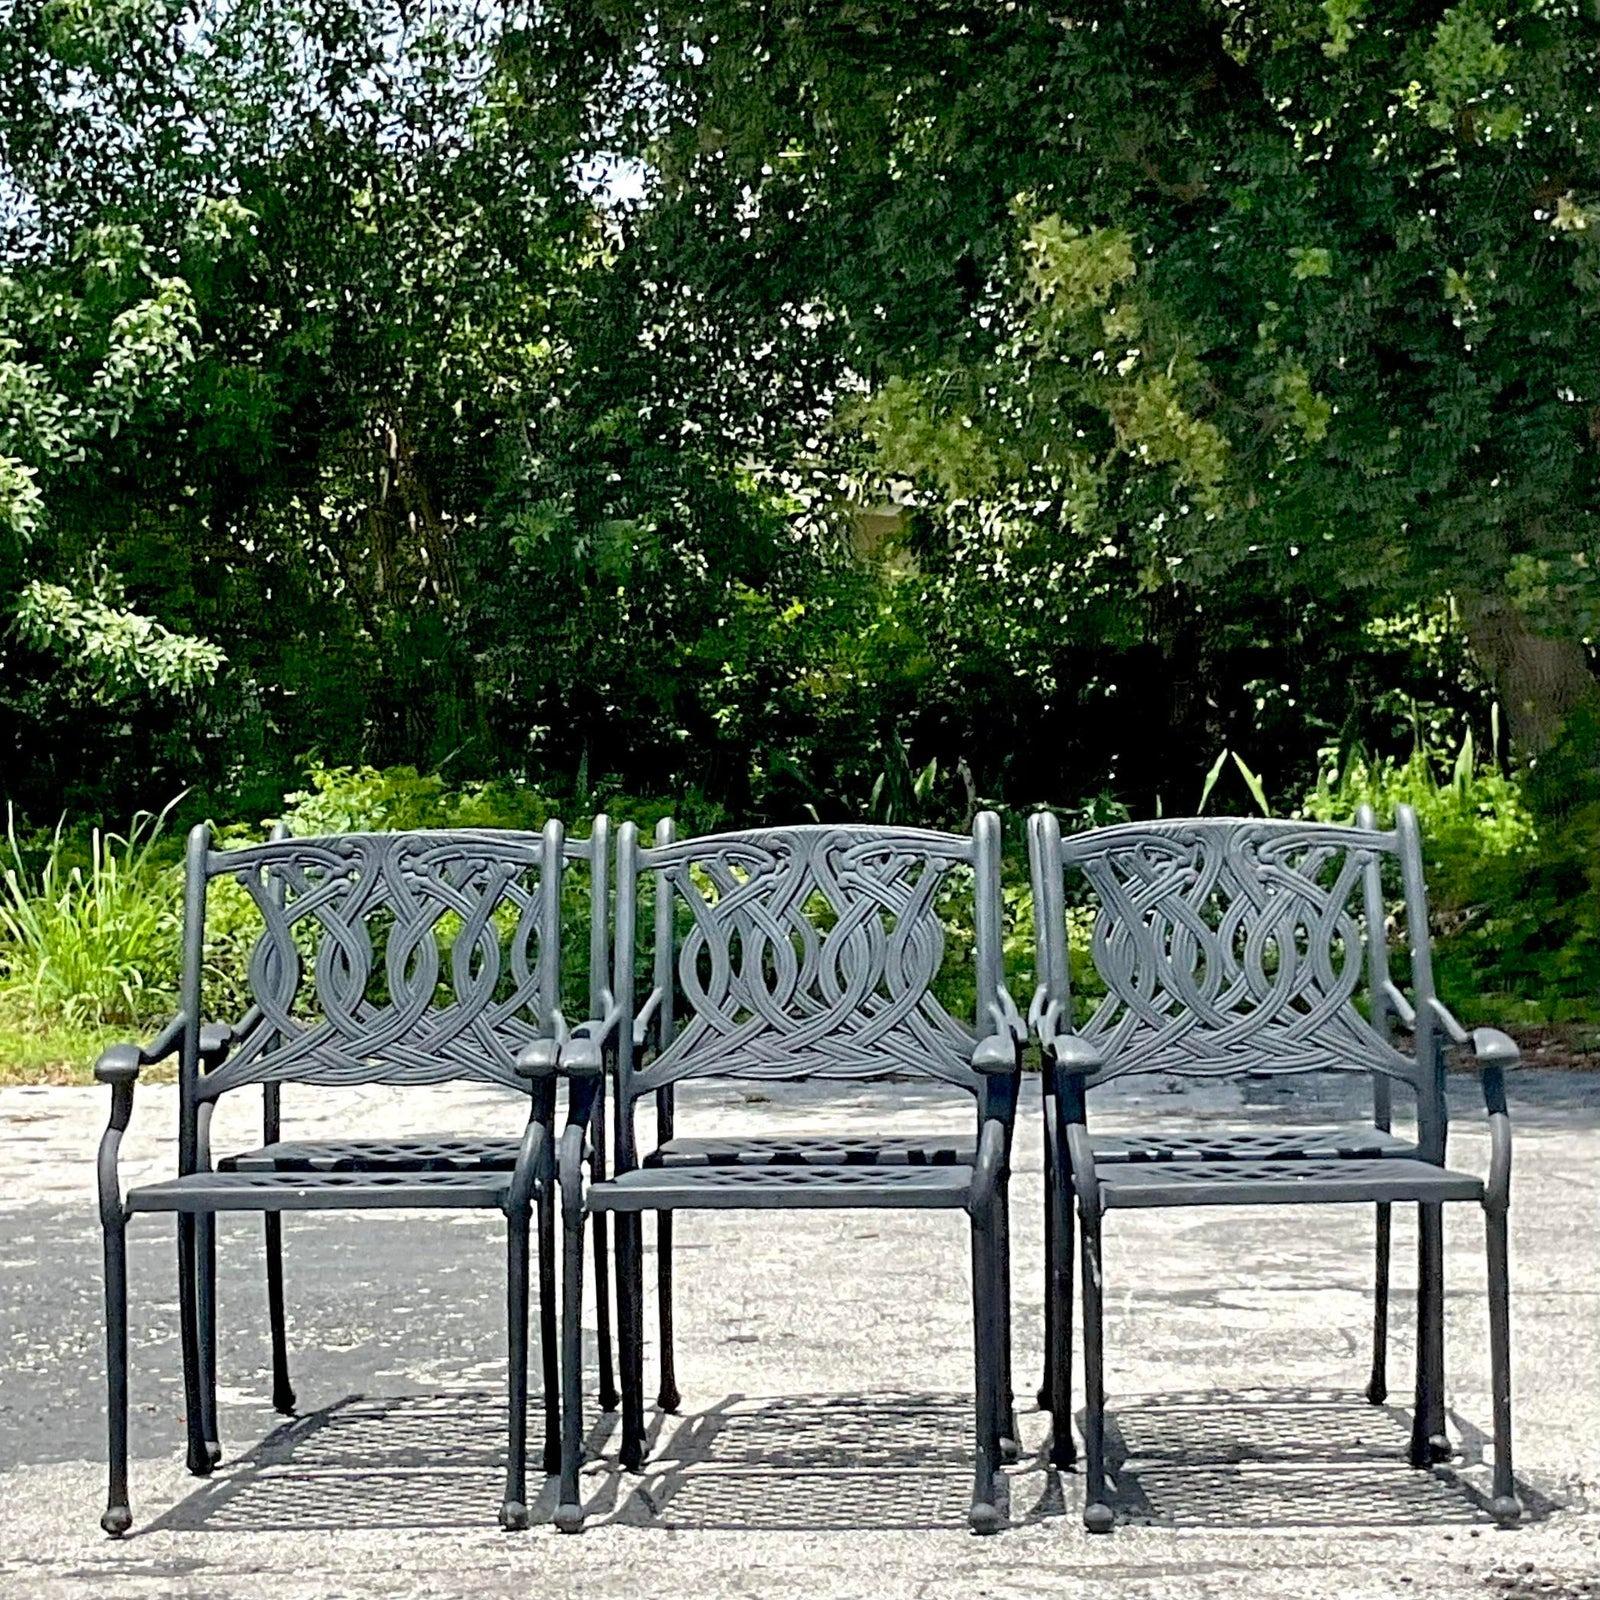 A fabulous set of 6 vintage Coastal Cast Aluminum outdoor dining chairs. A chic scroll design in a matte black finish. Perfect as is or easily painted to suit your project. Additional chairs available. Acquired from a Palm Beach estate.

Seat height